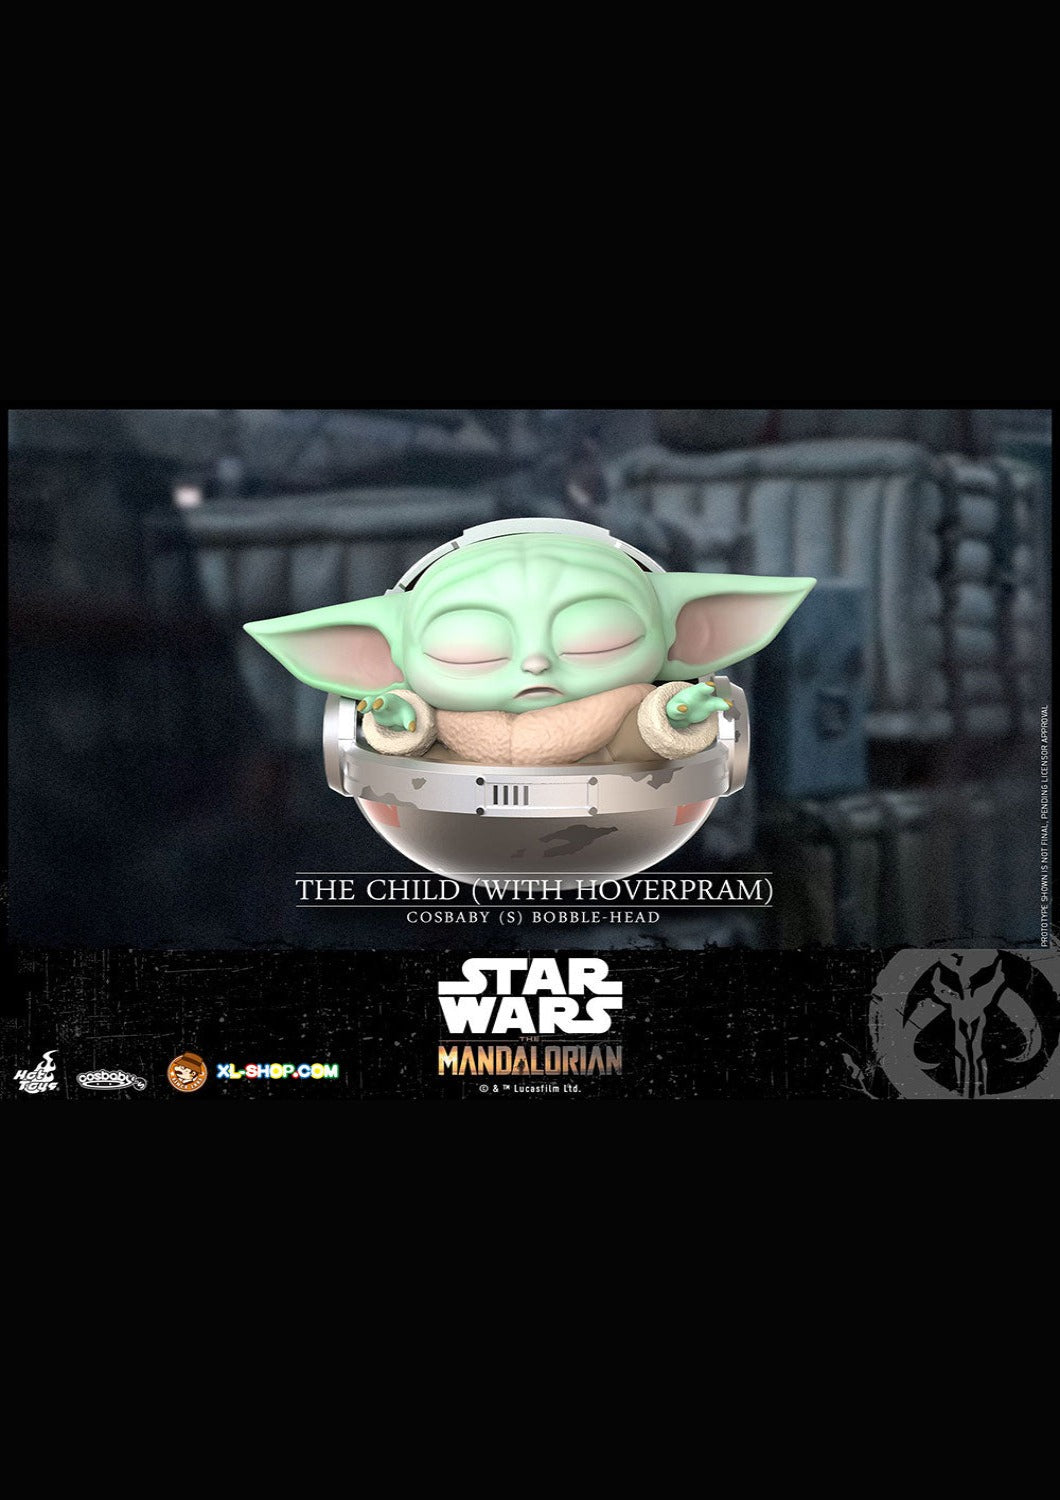 COSBABY STAR WARS THE CHILD (WITH HOVERPRAM) BOBBLE HEAD COSB842 - Anotoys Collectibles